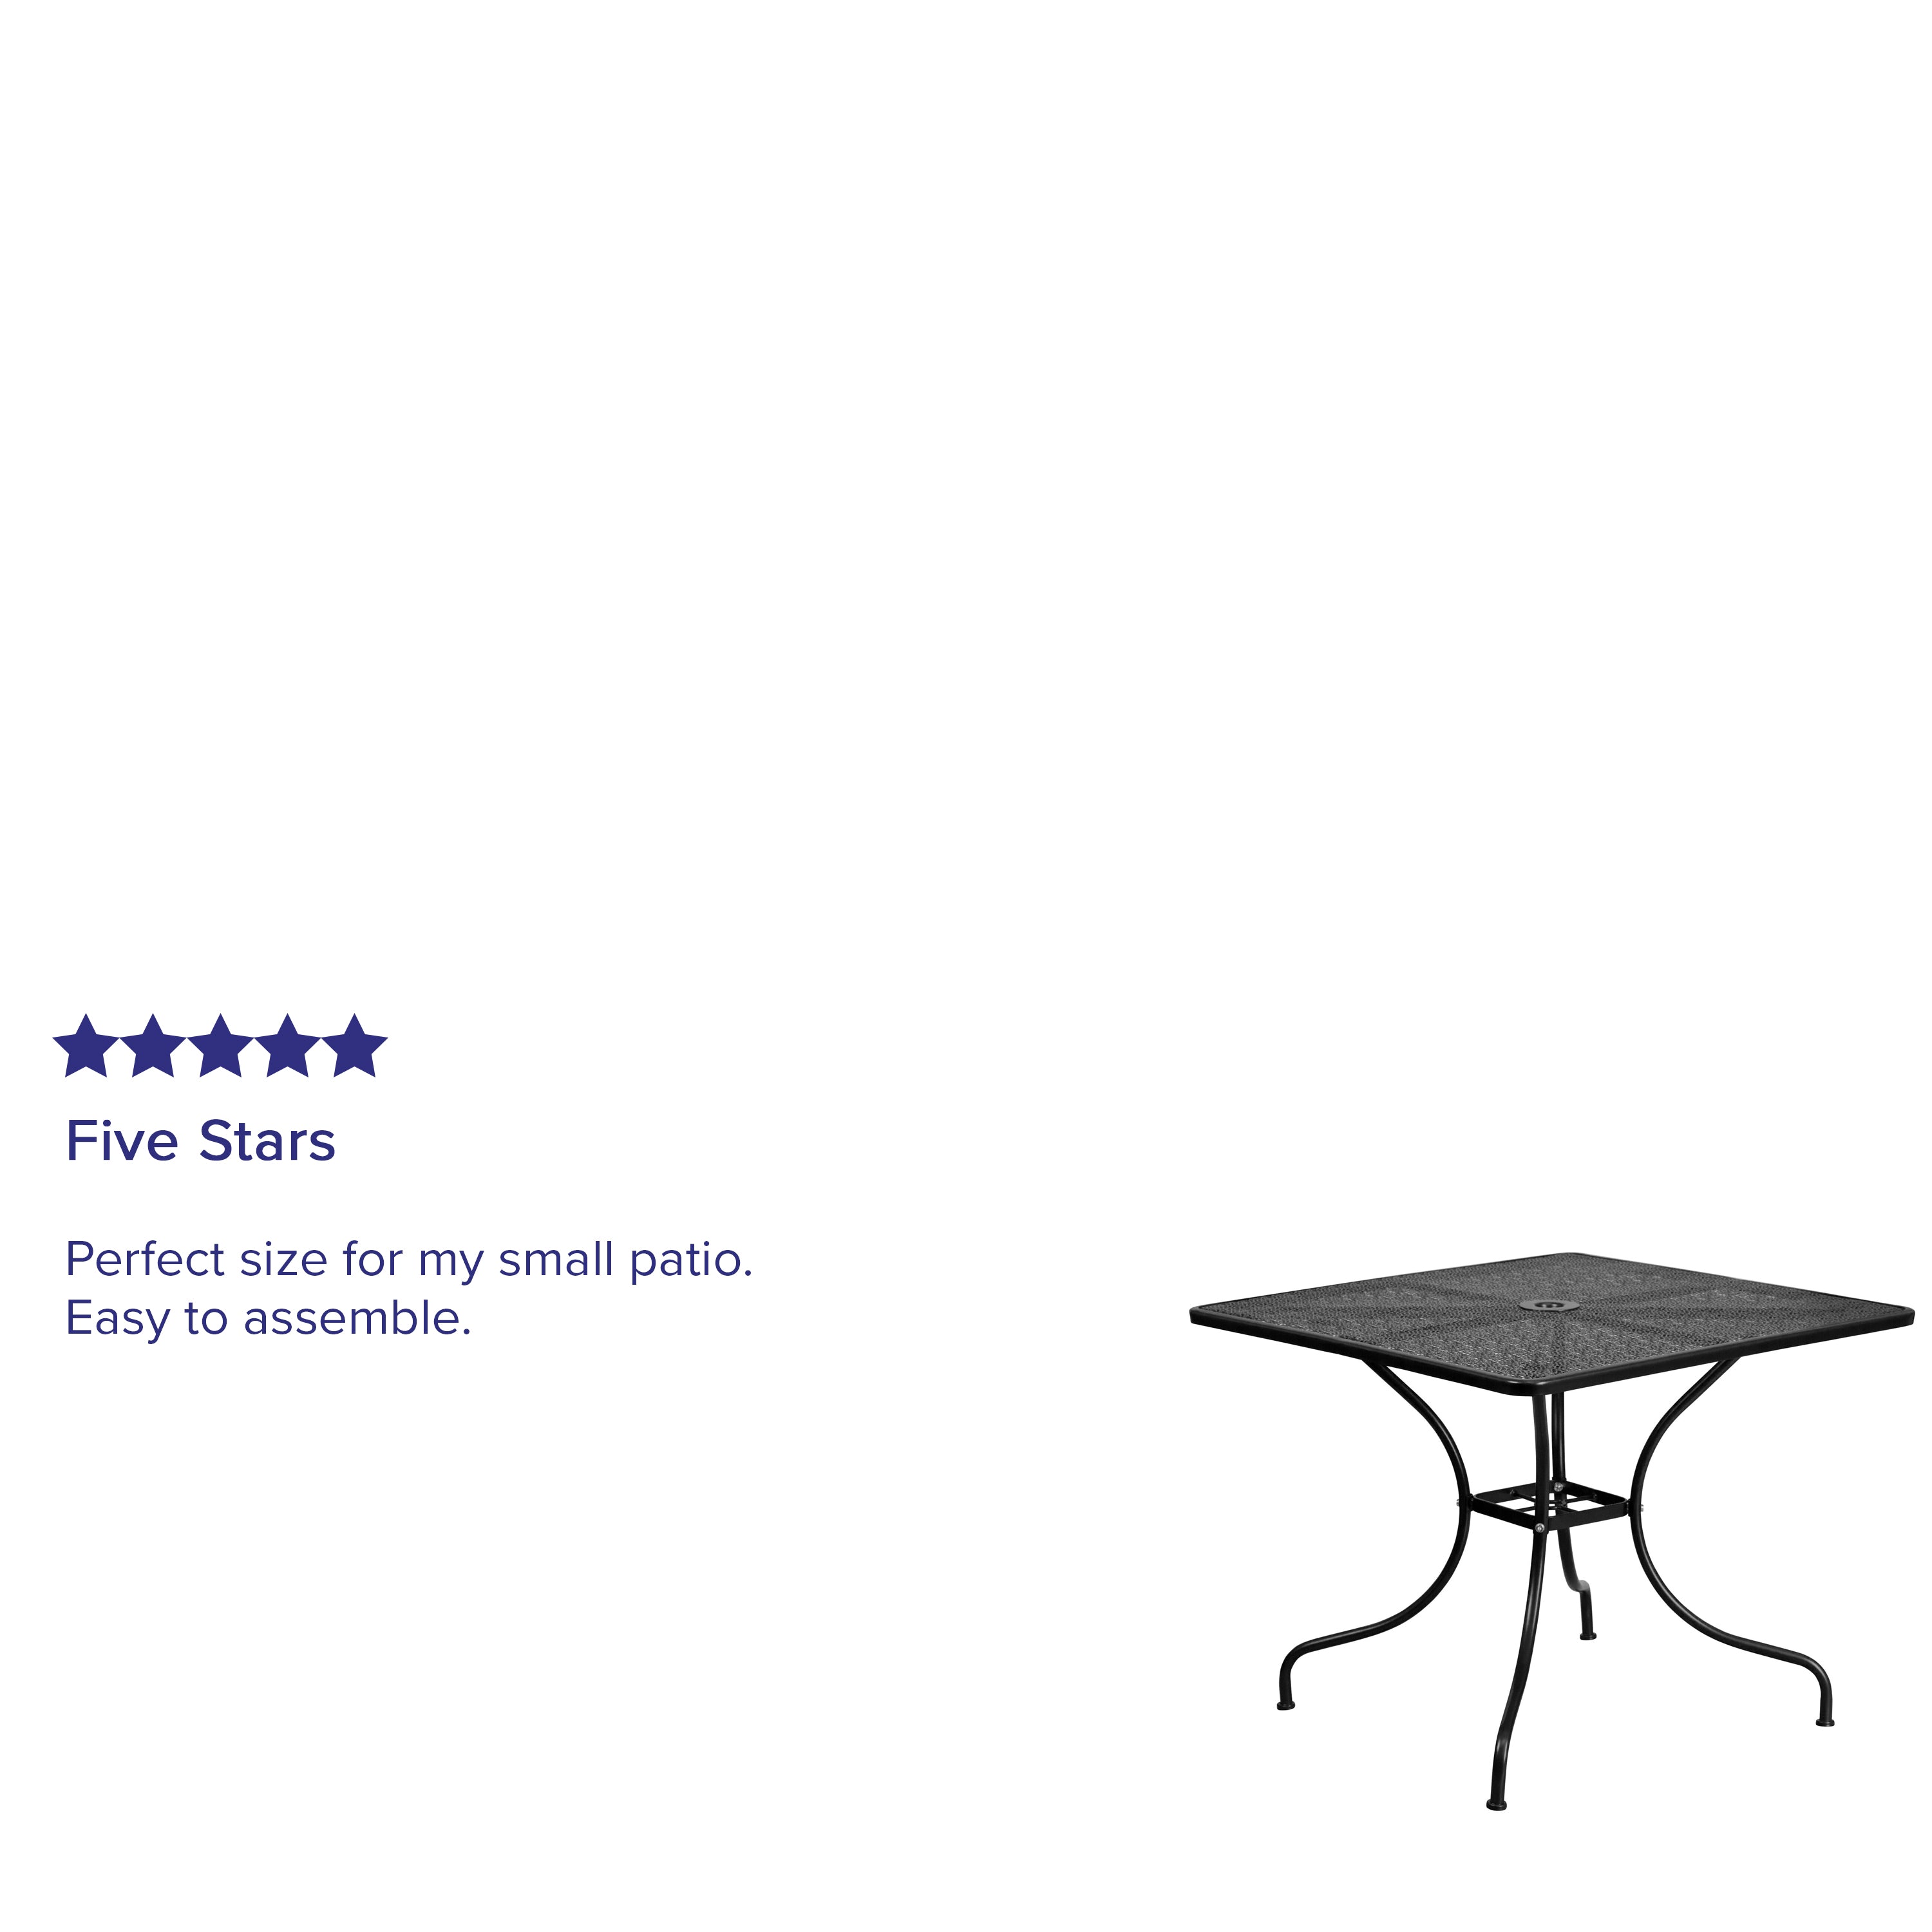 Oia Commercial Grade 35.5" Square Indoor-Outdoor Steel Patio Table with Umbrella Hole-Indoor/Outdoor Tables-Flash Furniture-Wall2Wall Furnishings